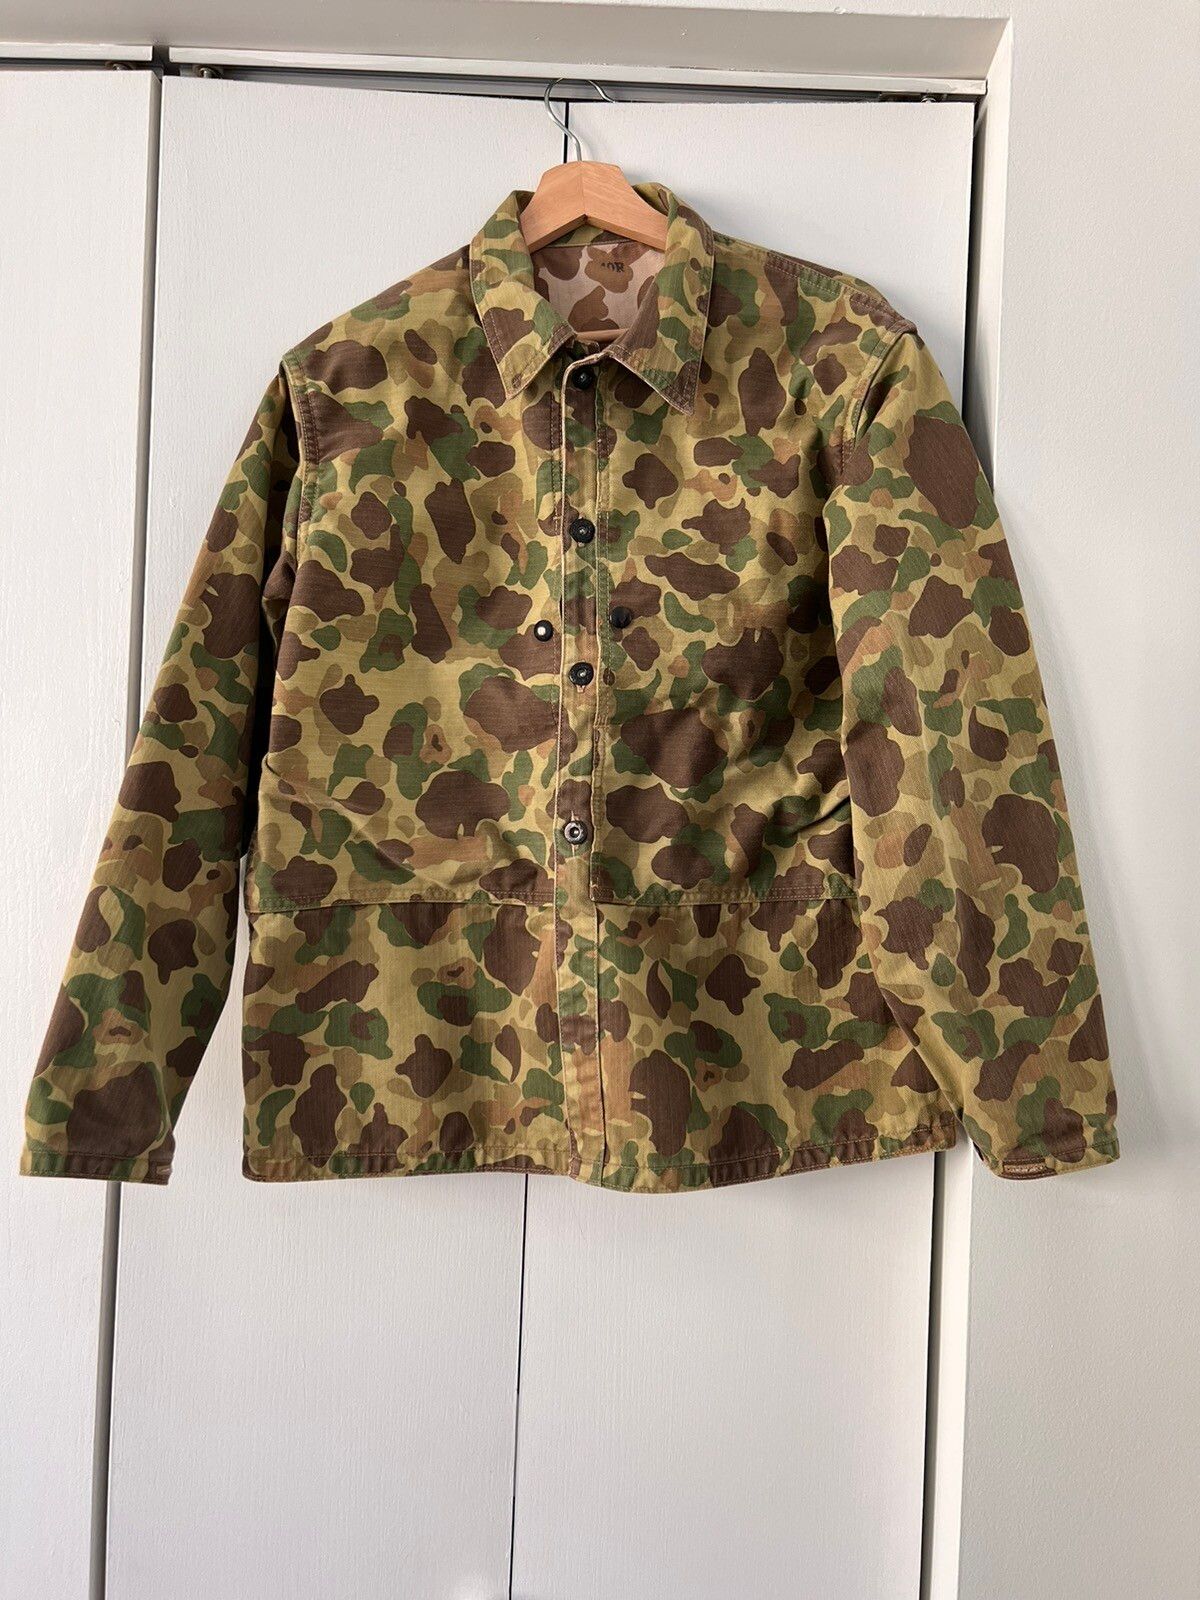 The Real McCoy's The REAL McCOY’s P1944 Frogskin Camo Jacket Size US M / EU 48-50 / 2 - 1 Preview